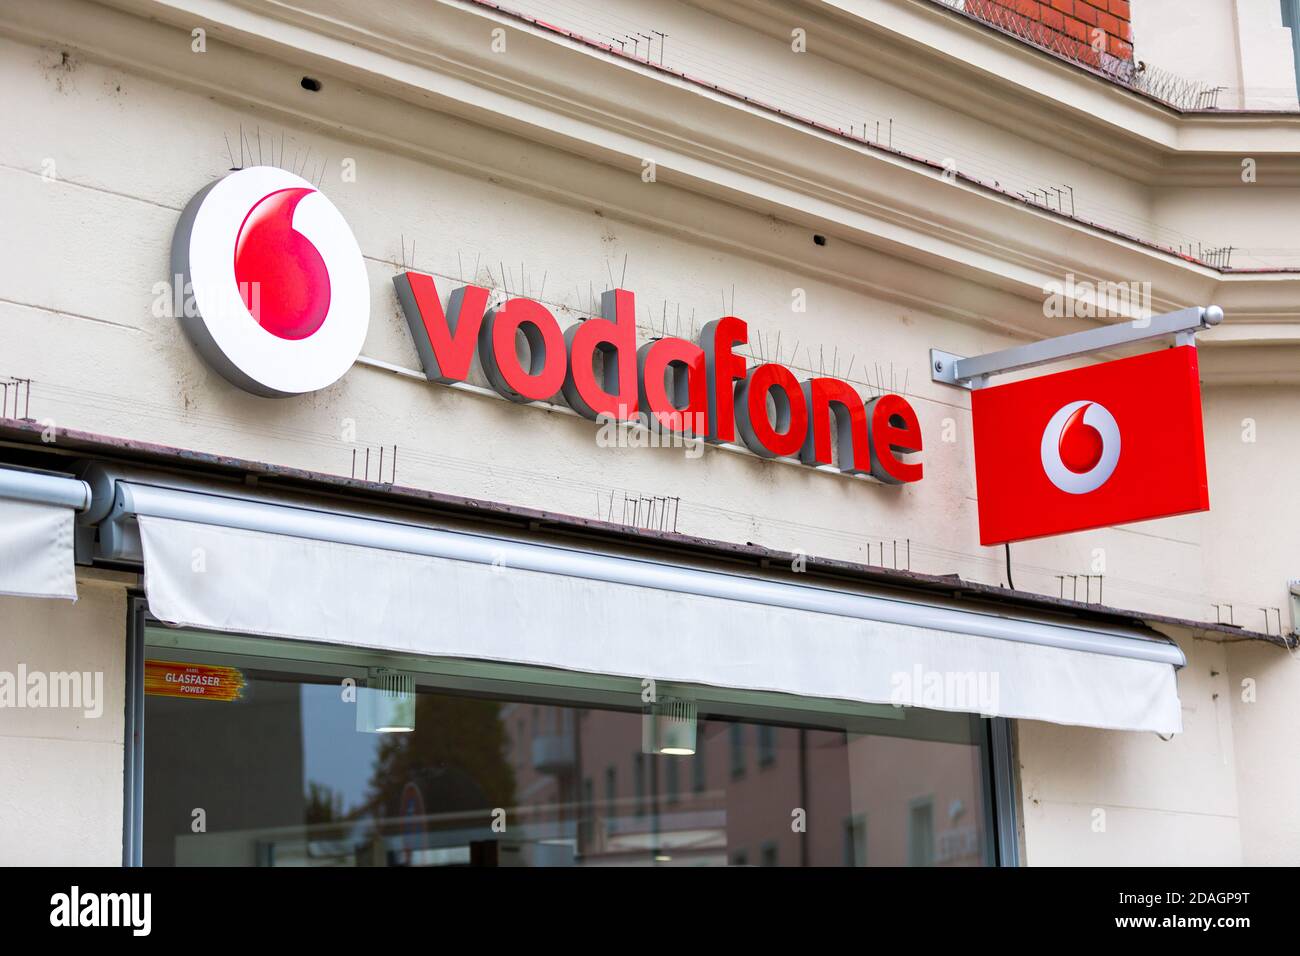 PASSAU / GERMANY - NOVEMBER 8, 2020: Branch logo of Vodafone. Vodafone GmbH is a German subsidiary of Vodafone Group plc, a company based in the UK. Stock Photo